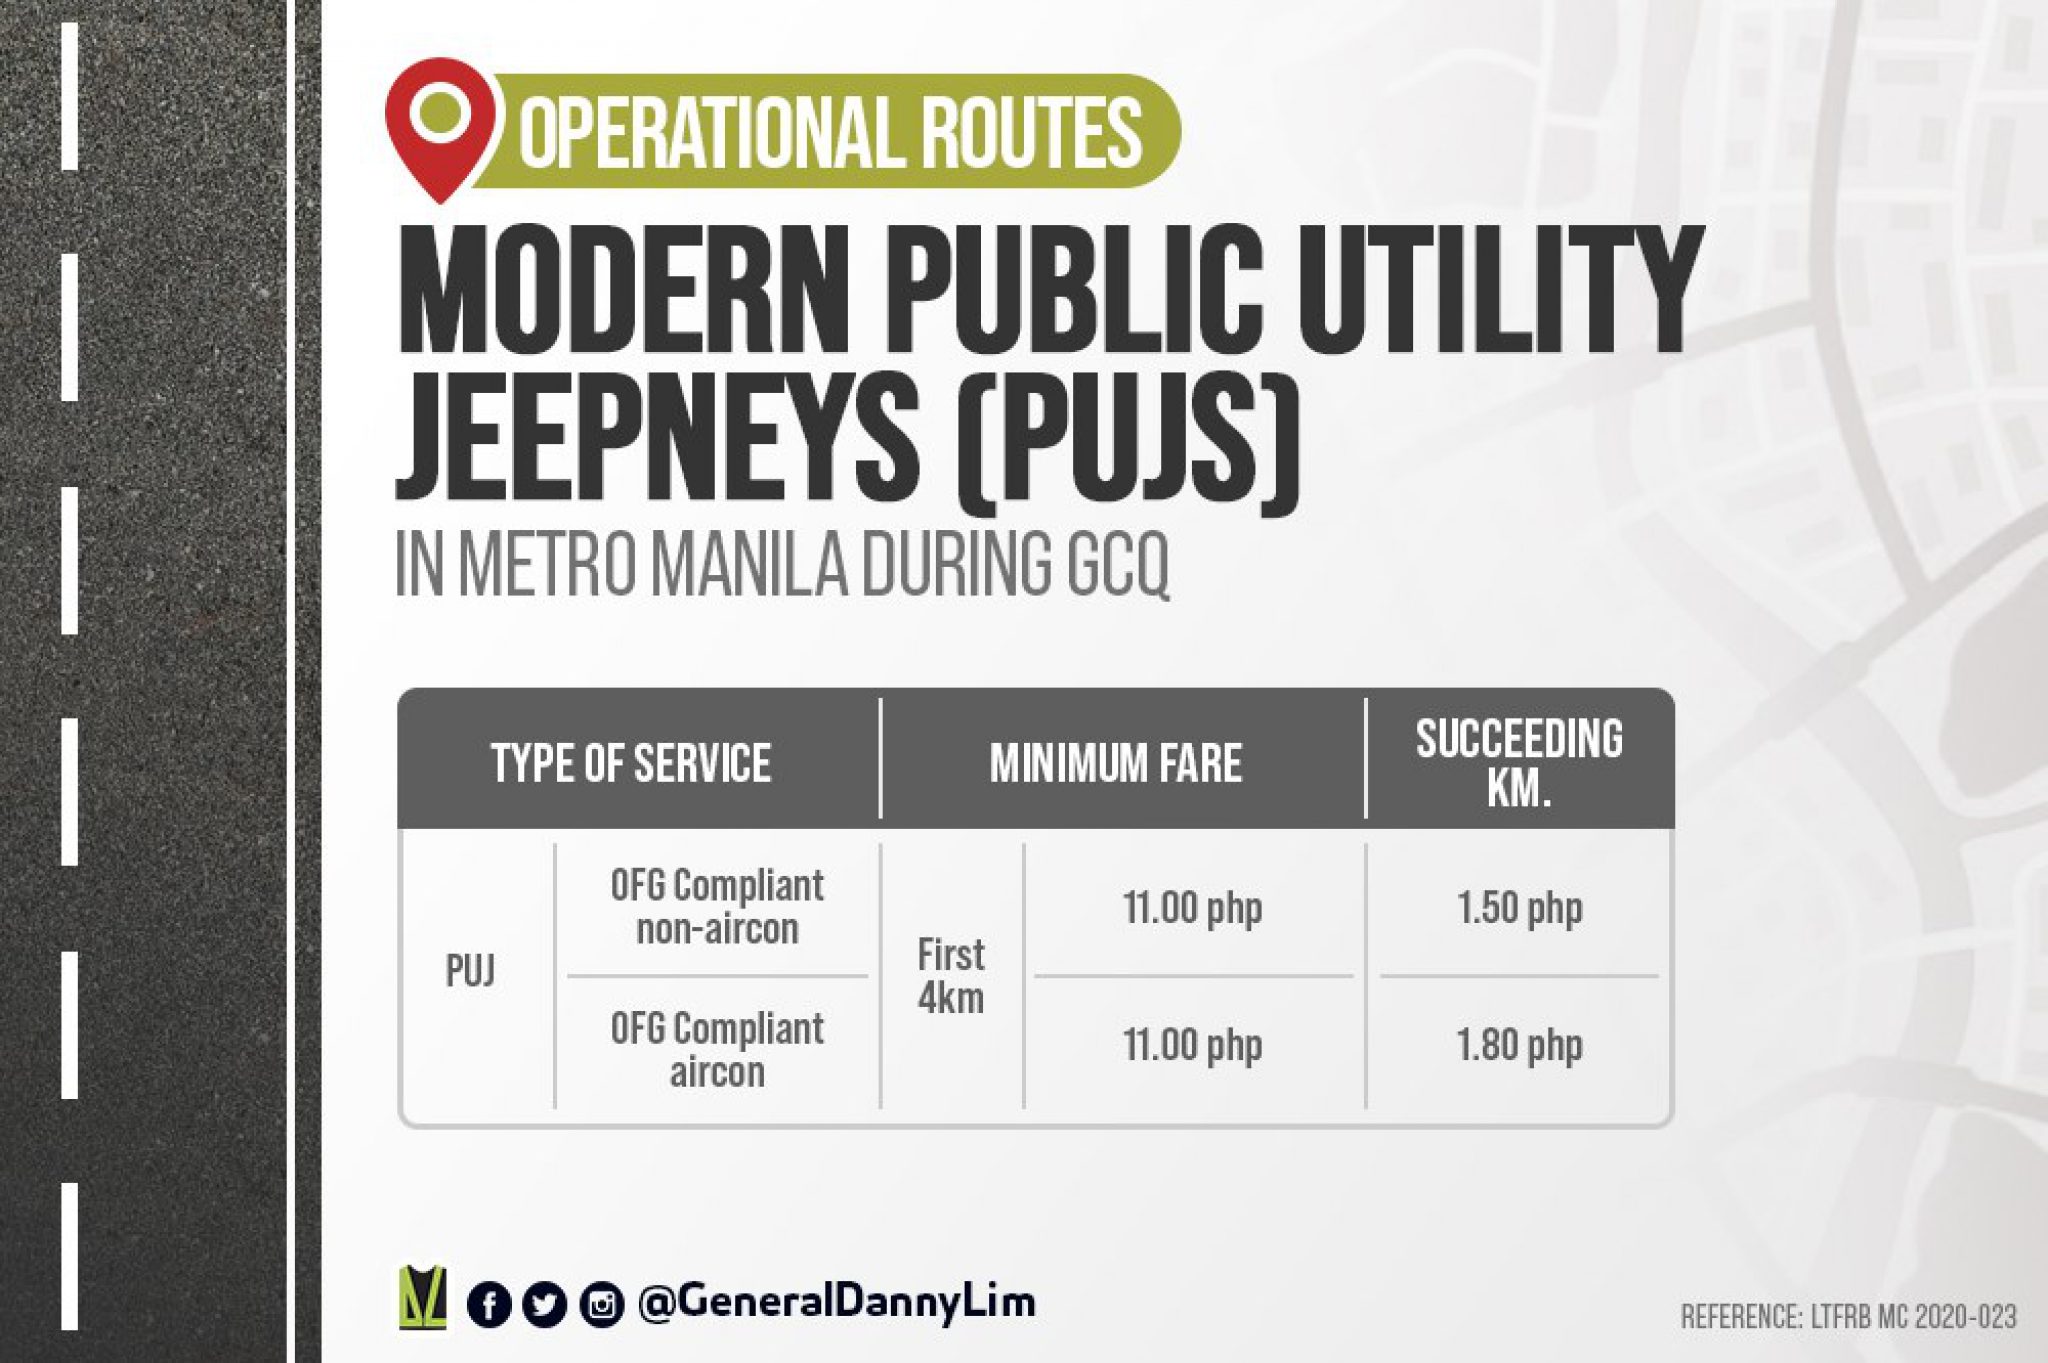 Modern PUJ operational routes